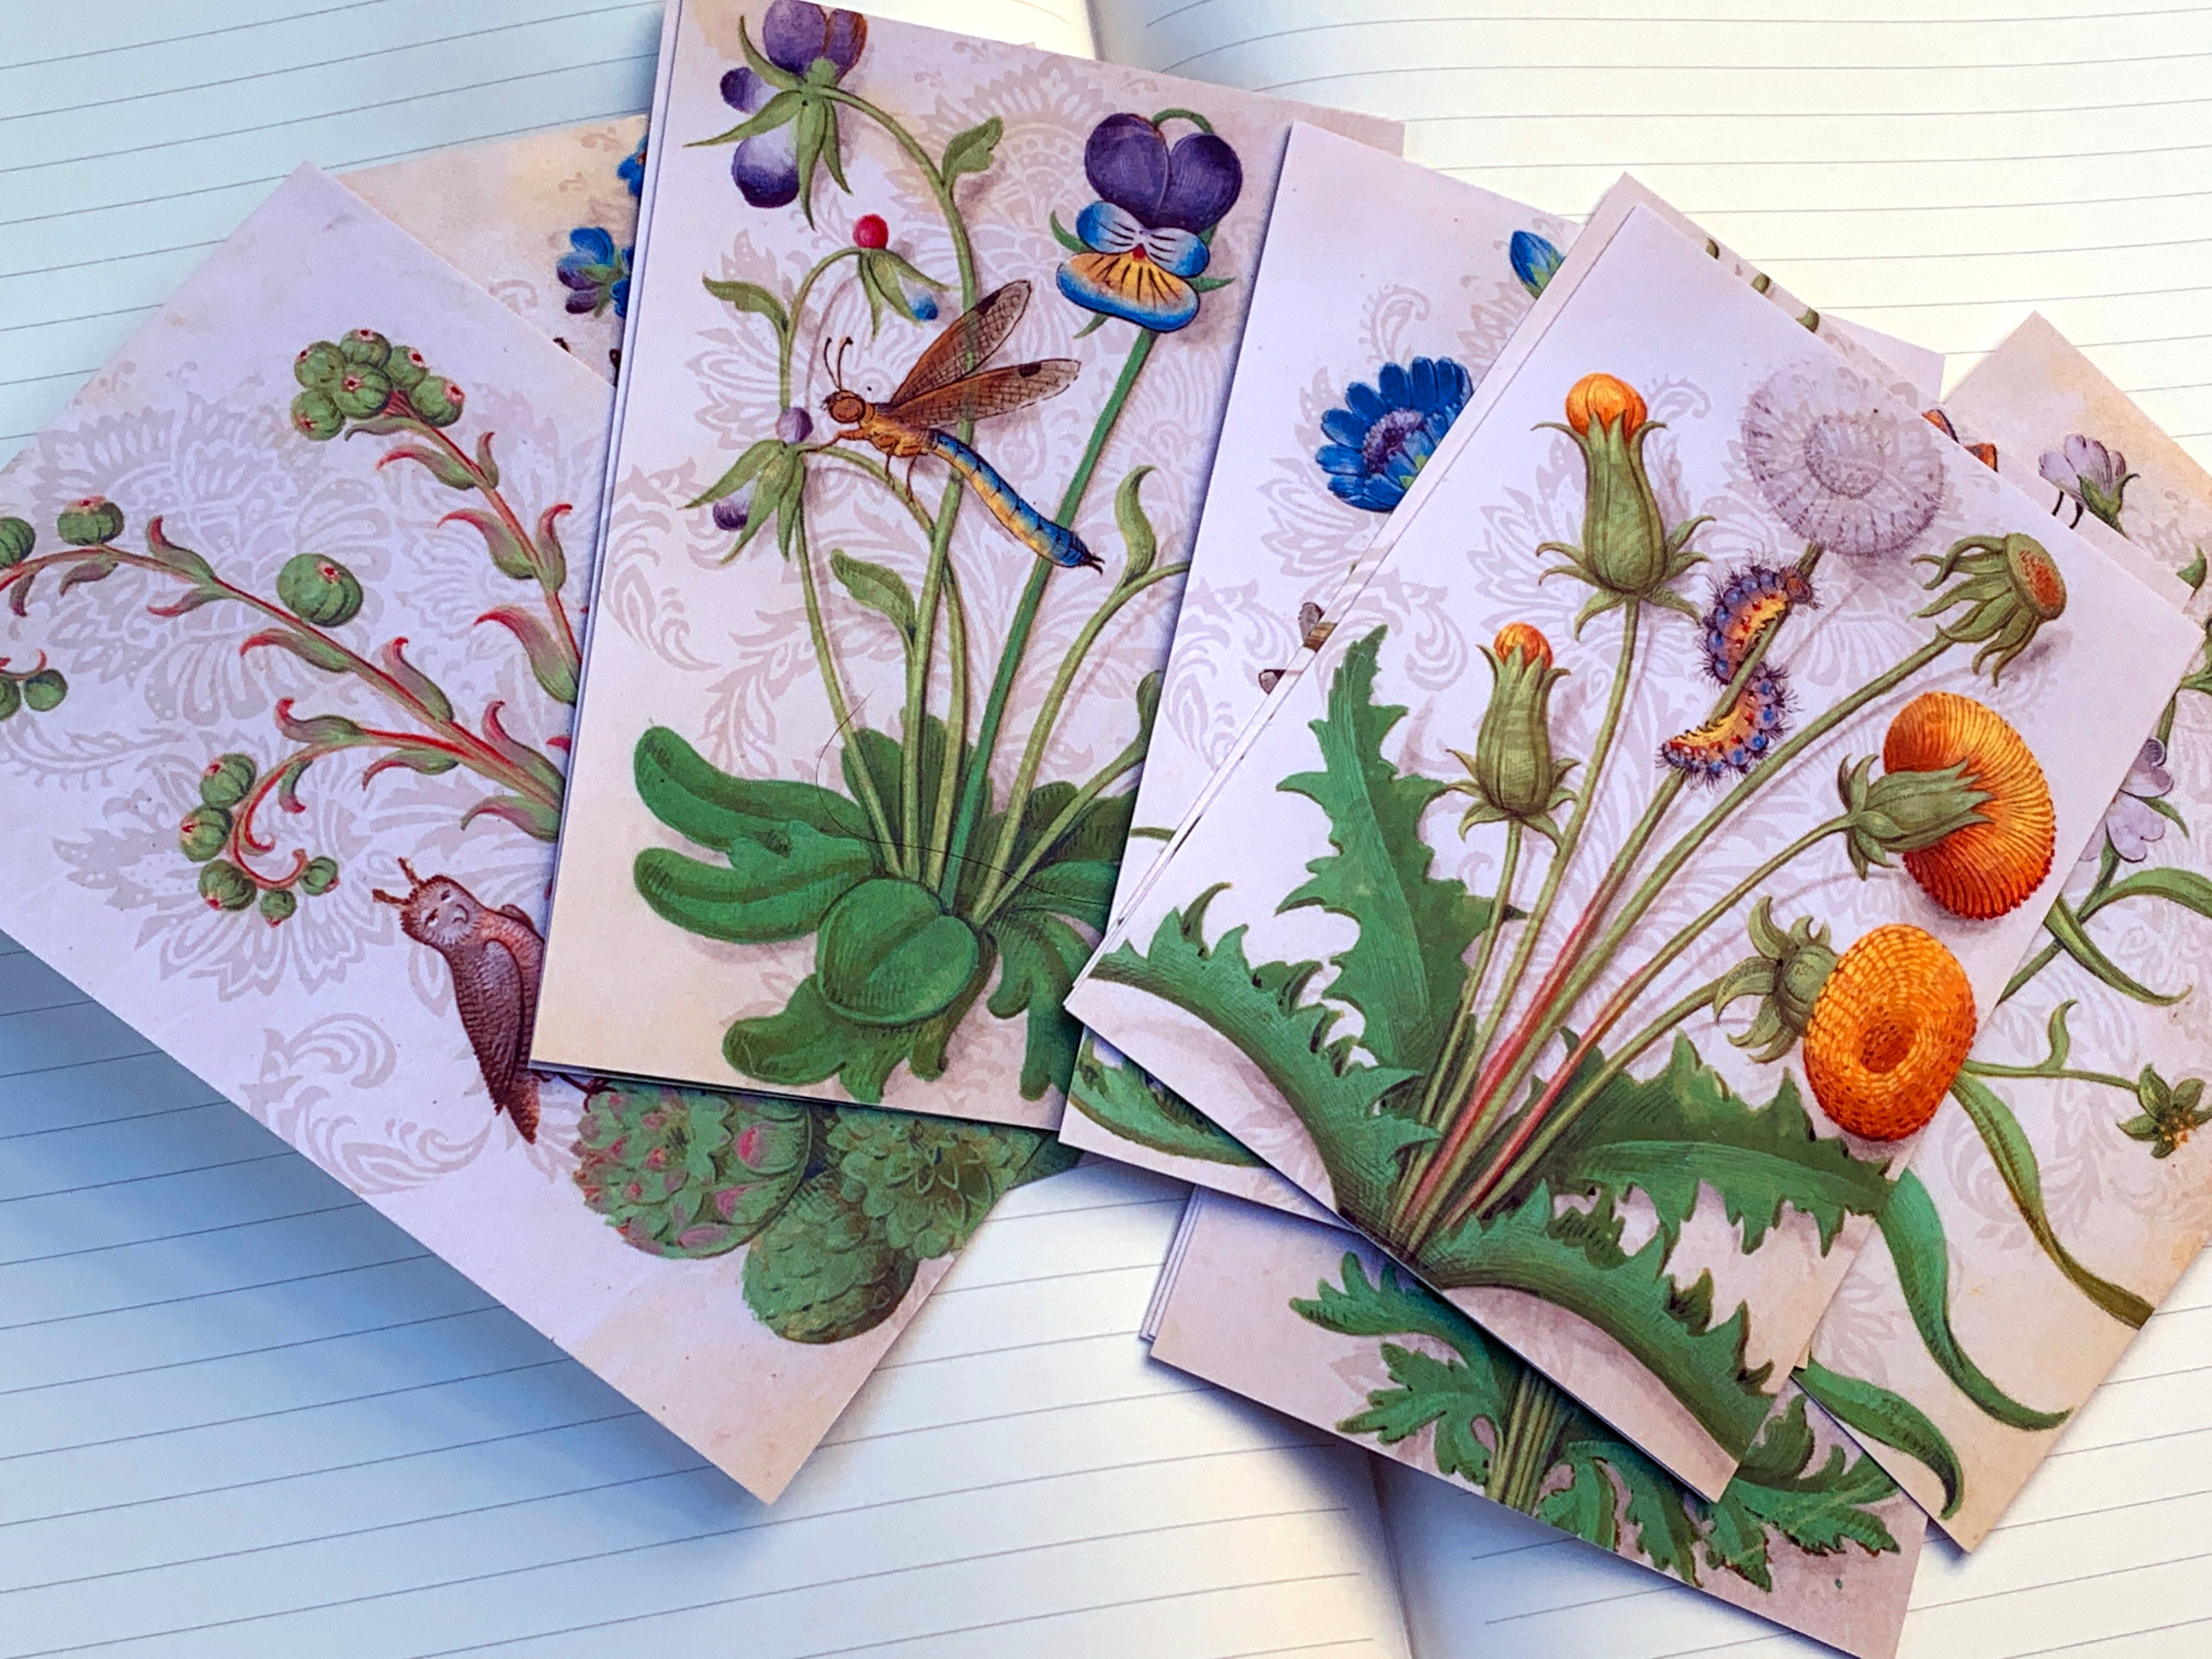 Book of Flower Studies, Everyday Notecards/Postcards for Literature and Garden Lovers, 12 Designs, 12 Cards